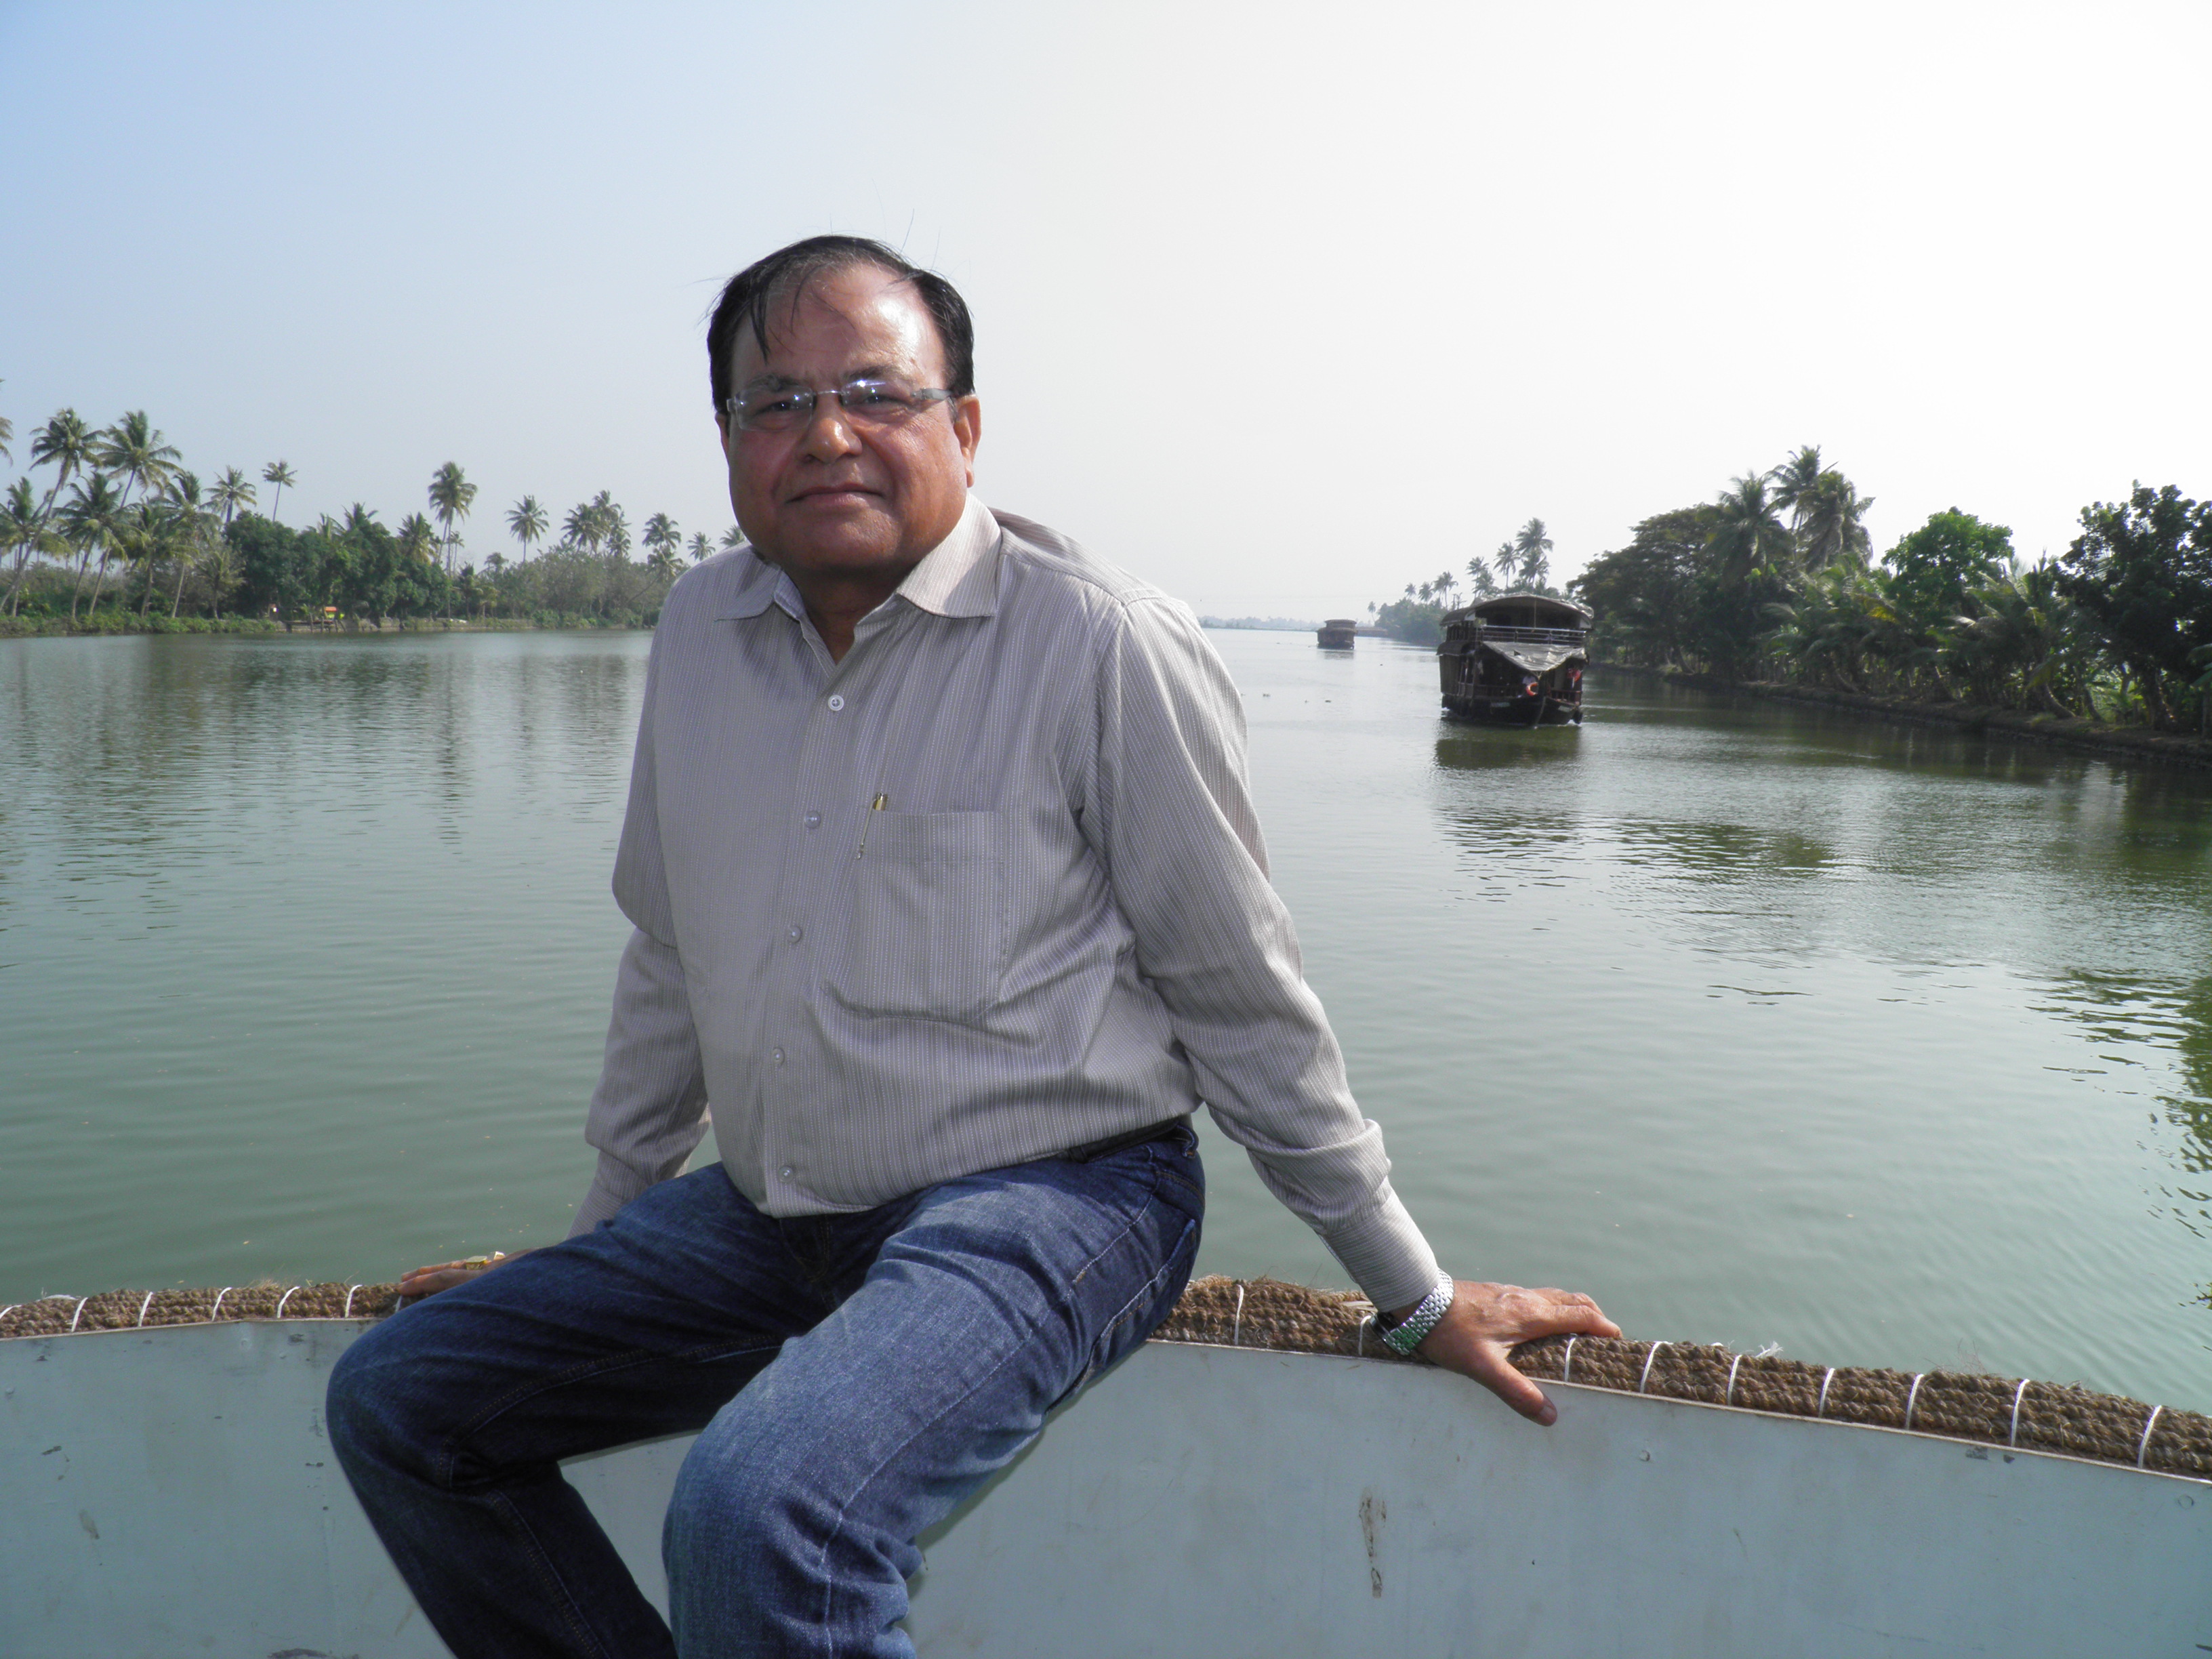 Kashi Nath Keshri, central water commission - Chief Engineer